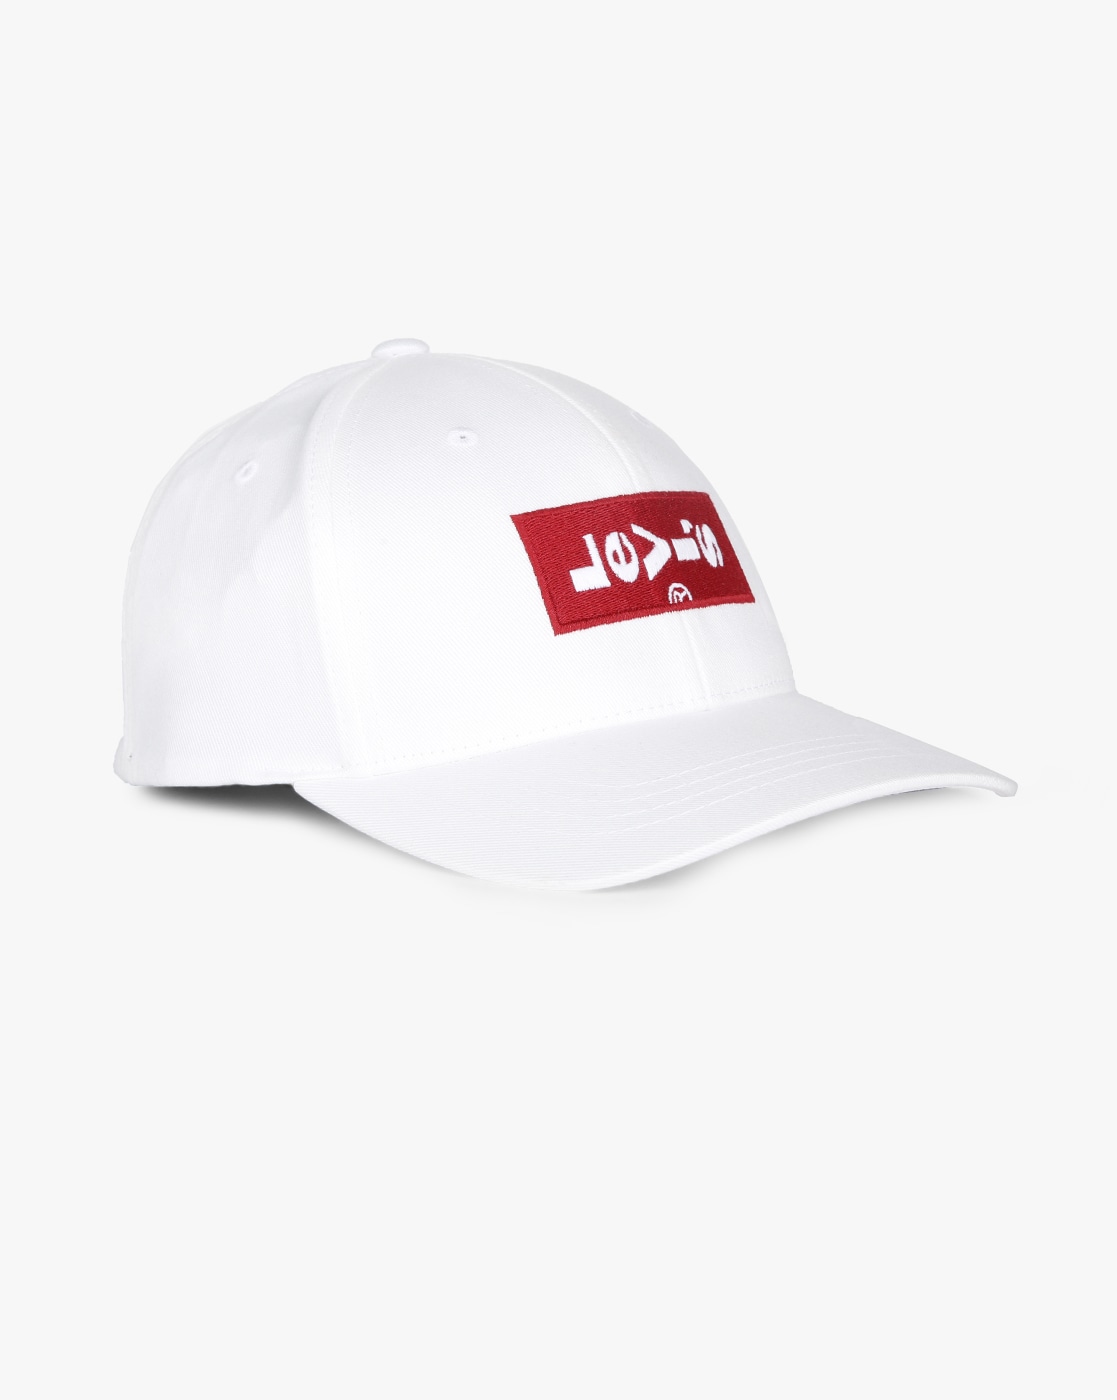 Buy White Caps & Hats for Men by LEVIS Online 